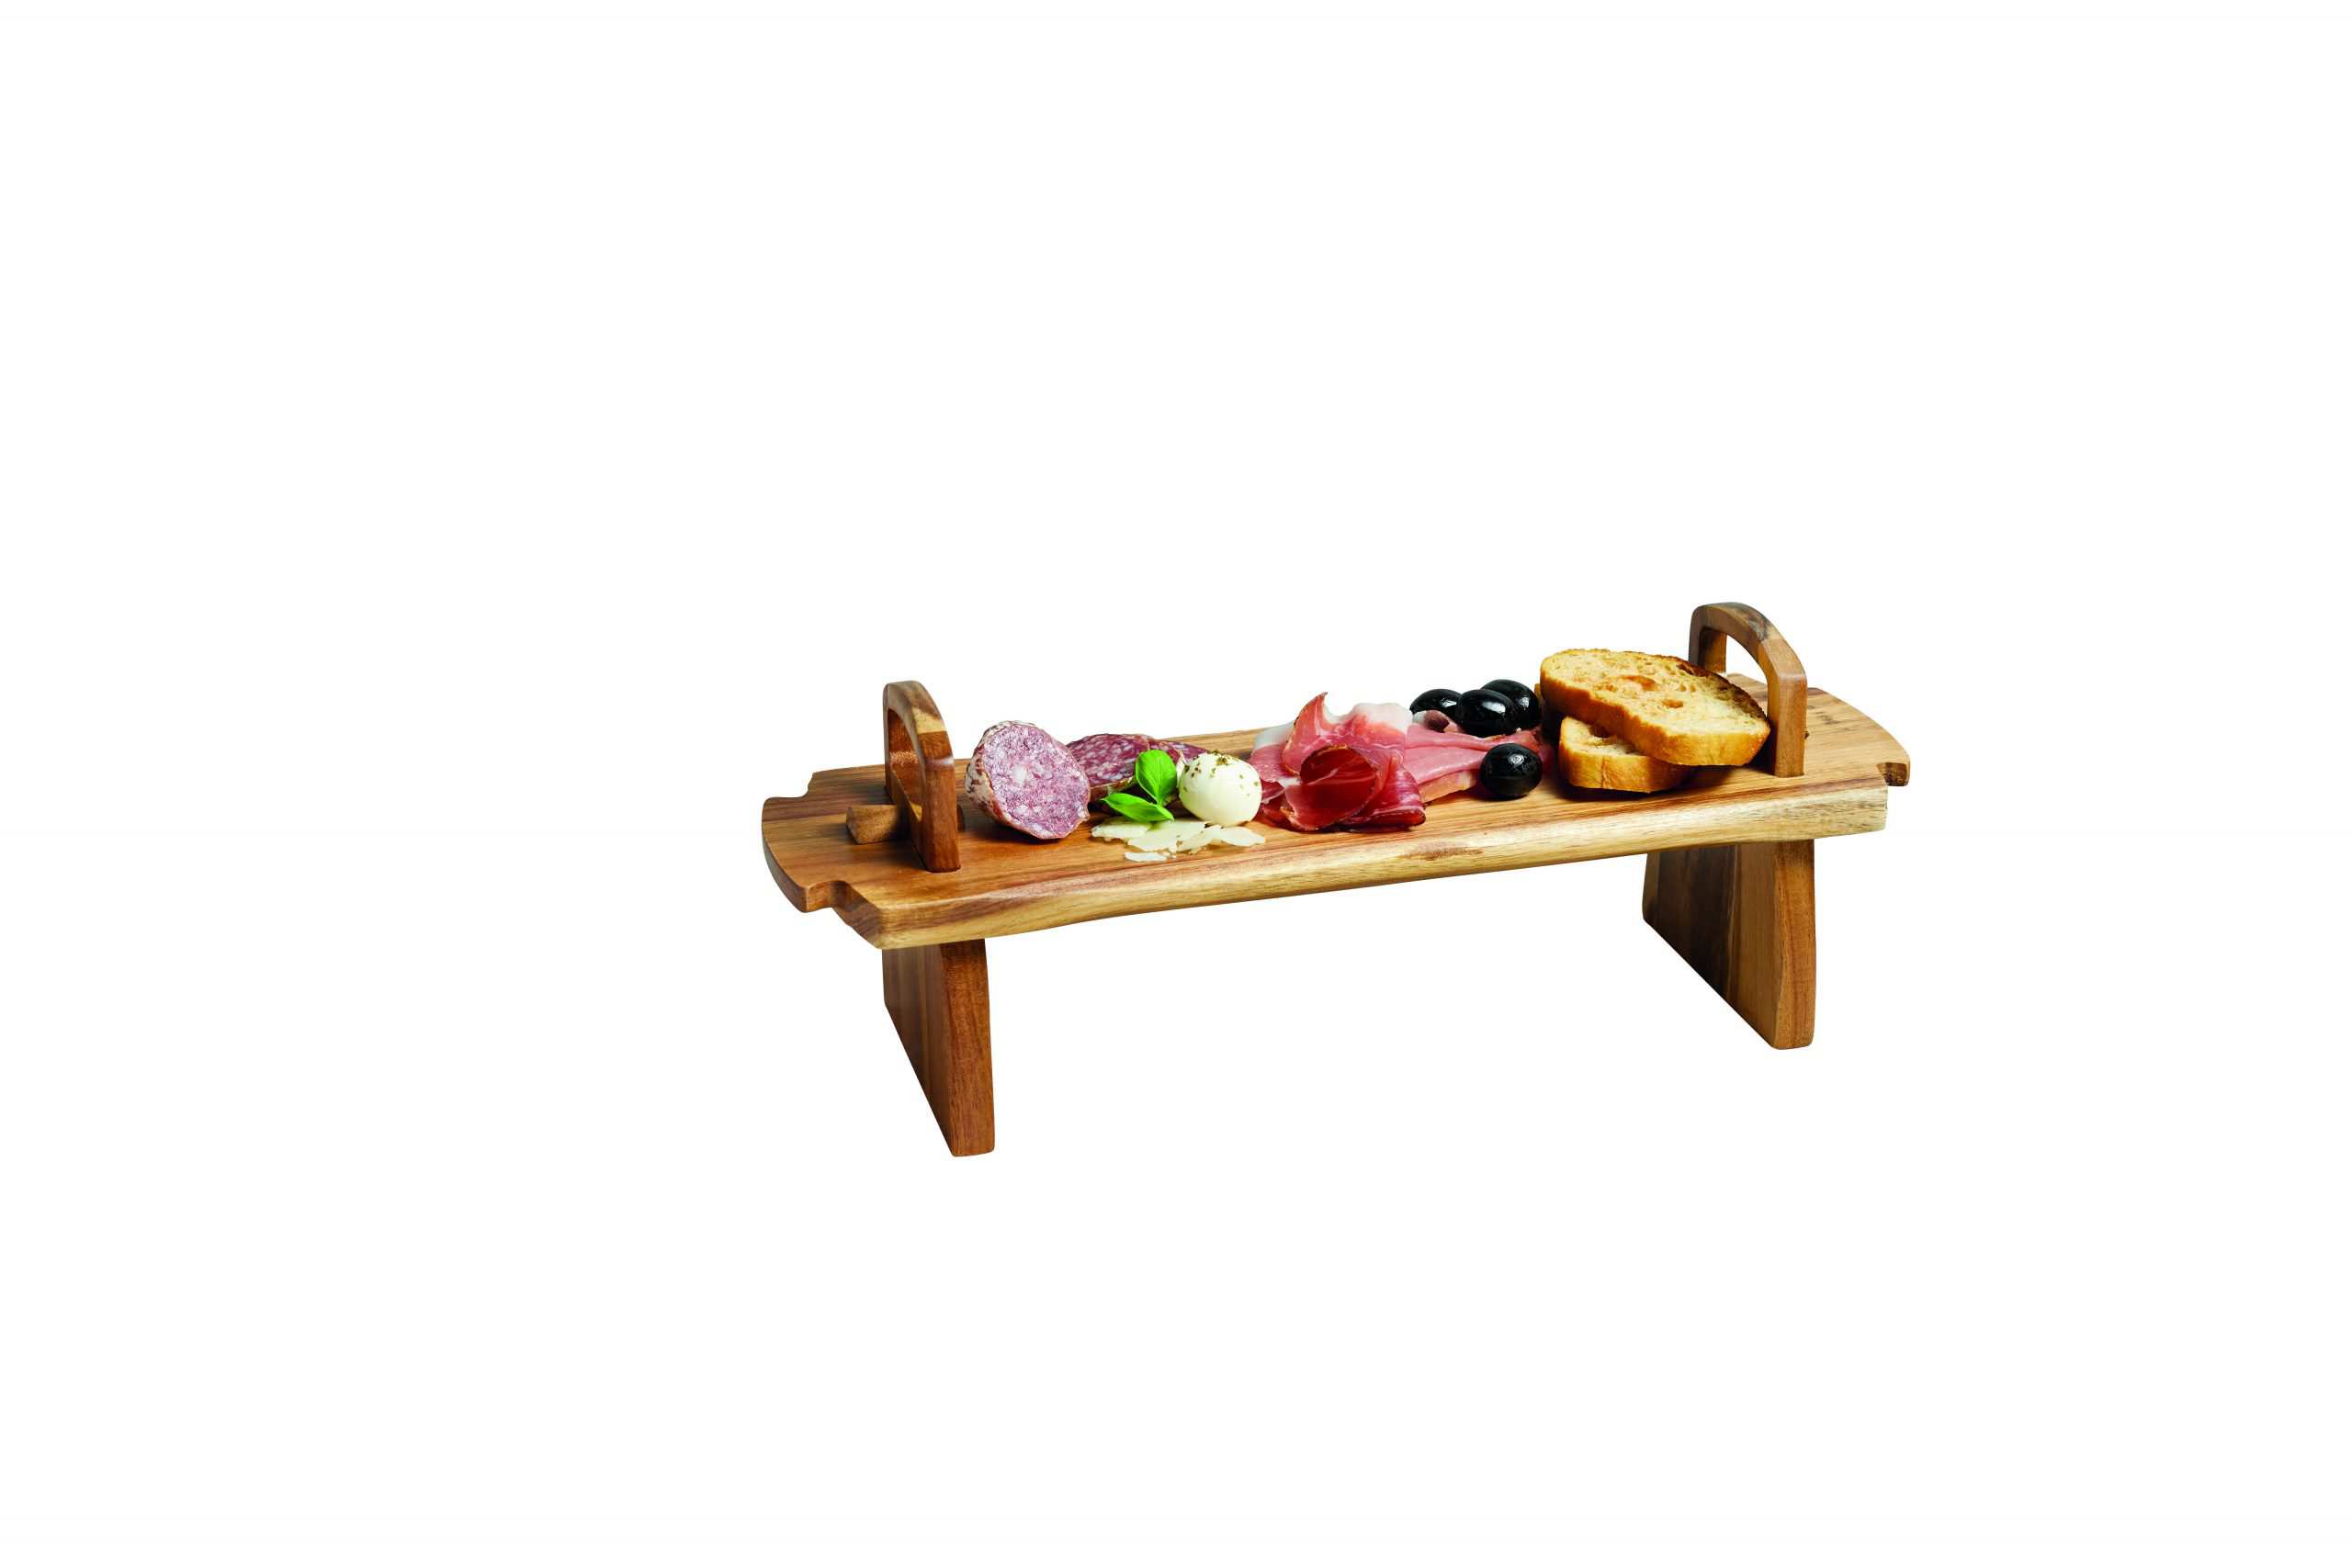 Entrees and Desserts 36 x 13 x 13 cm Tapas Acacia Wooden Raised Serving Platter for Antipasti 